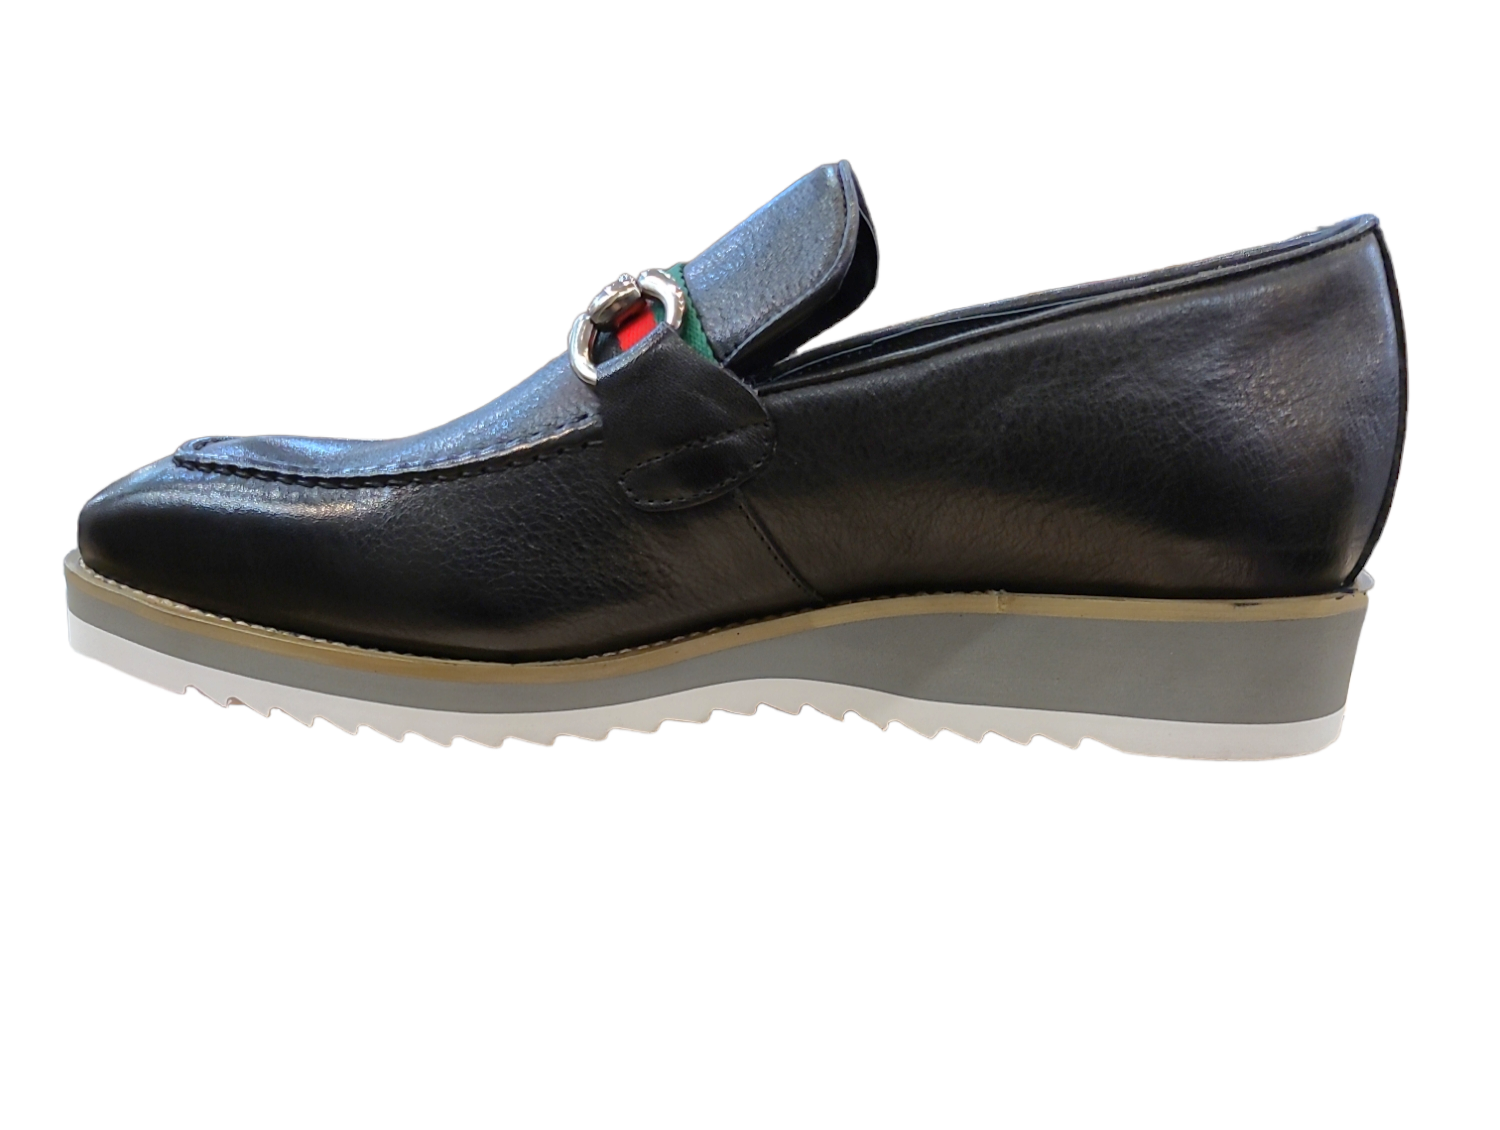 Carrucci Slip on Genuine leather Shoes